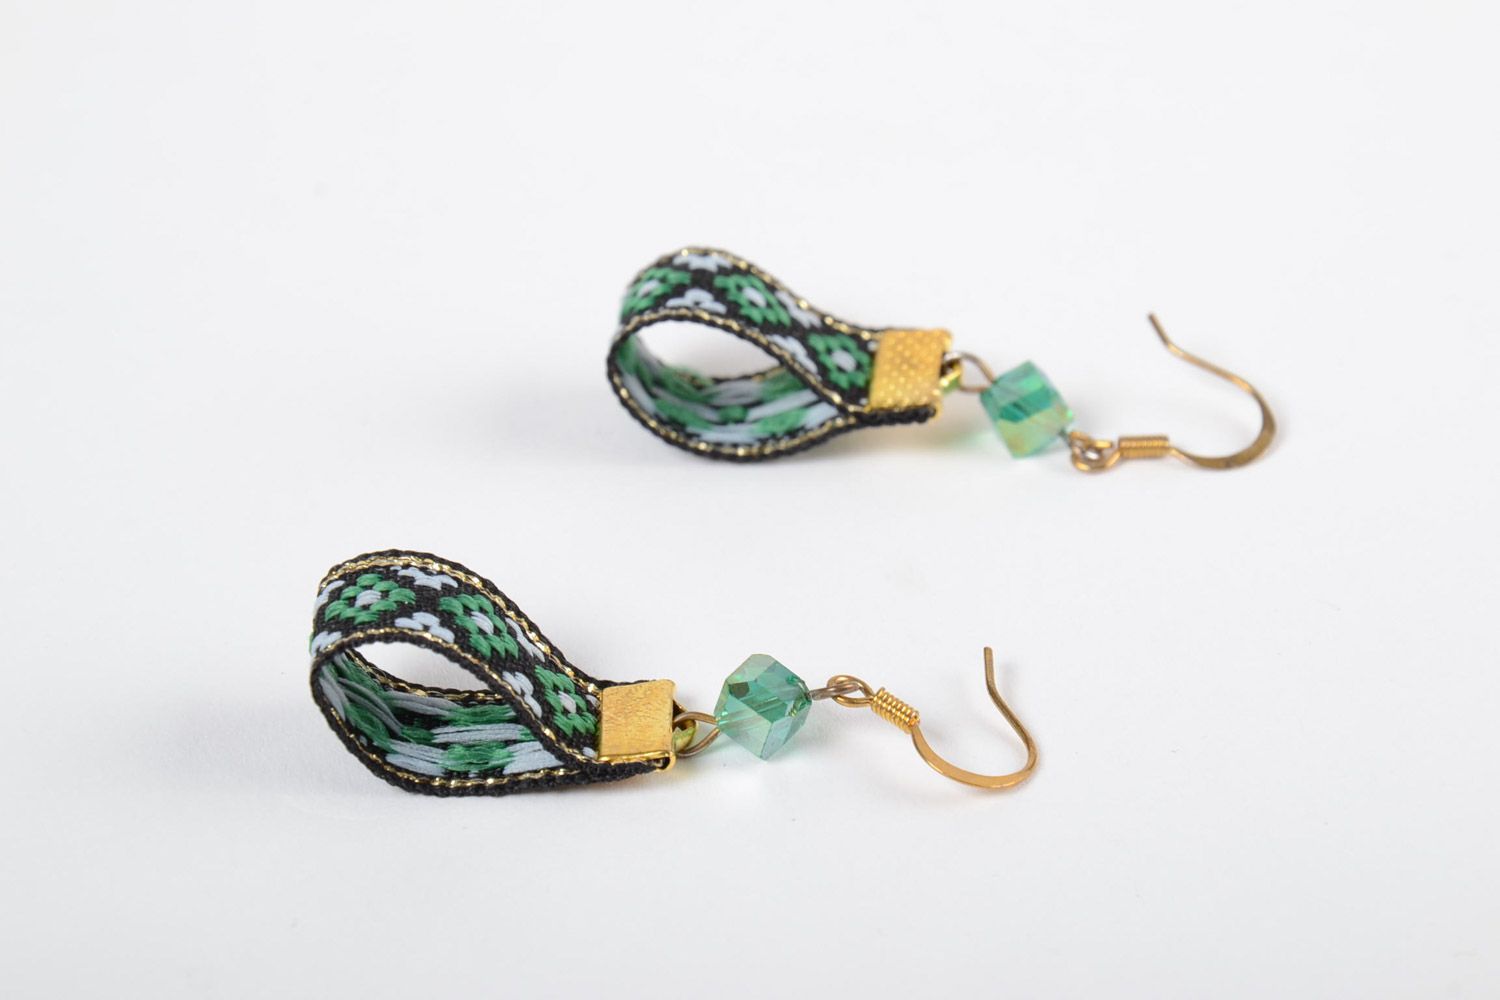 Handmade green earrings in ethnic style made of lace photo 3